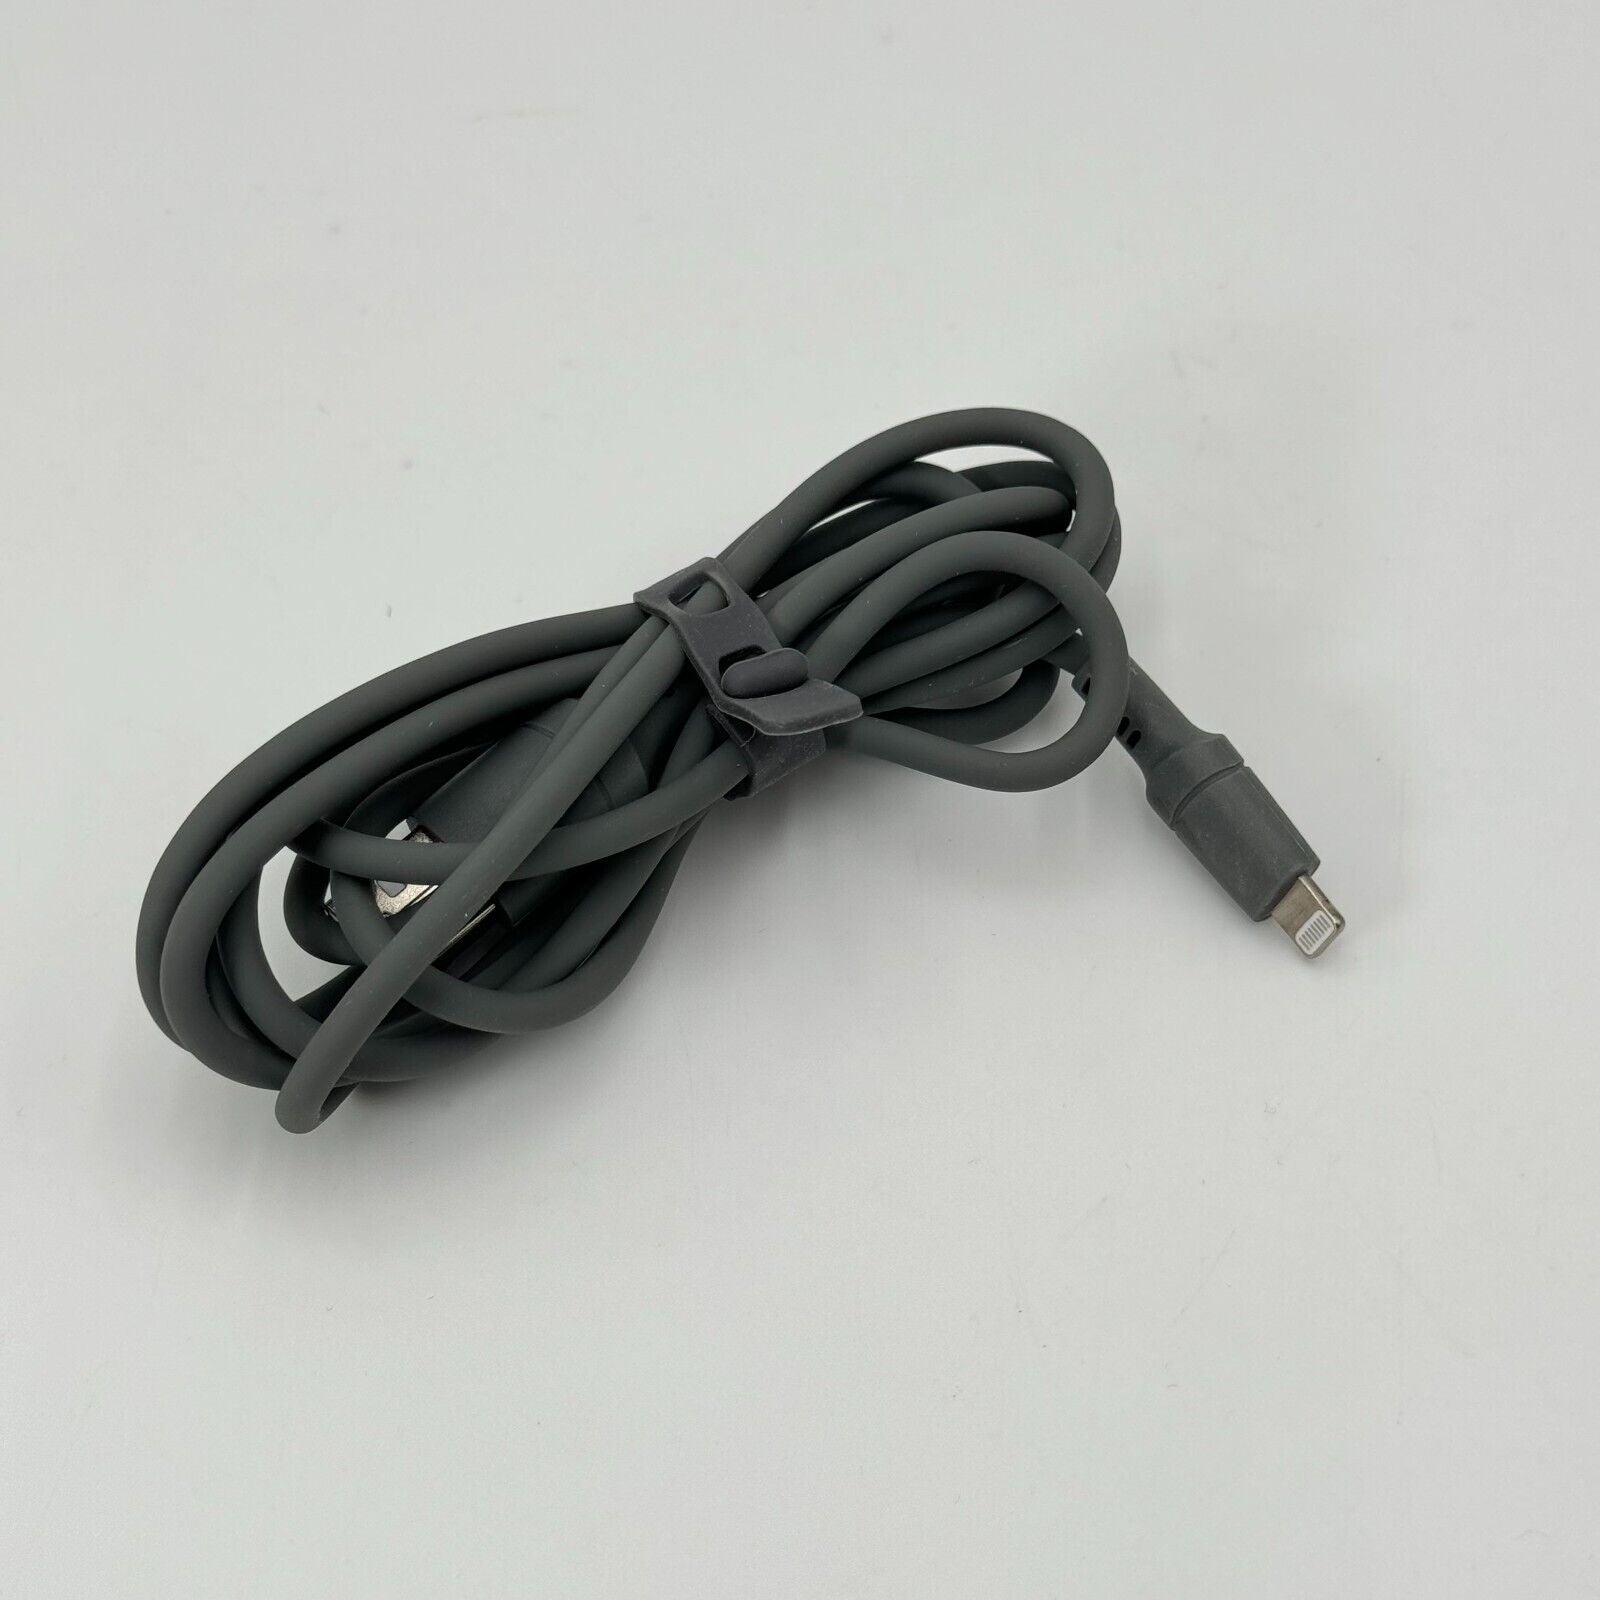 ZGEAR 6 Foot Silicone Rubber Sync & Charge Cable Tip iPhone